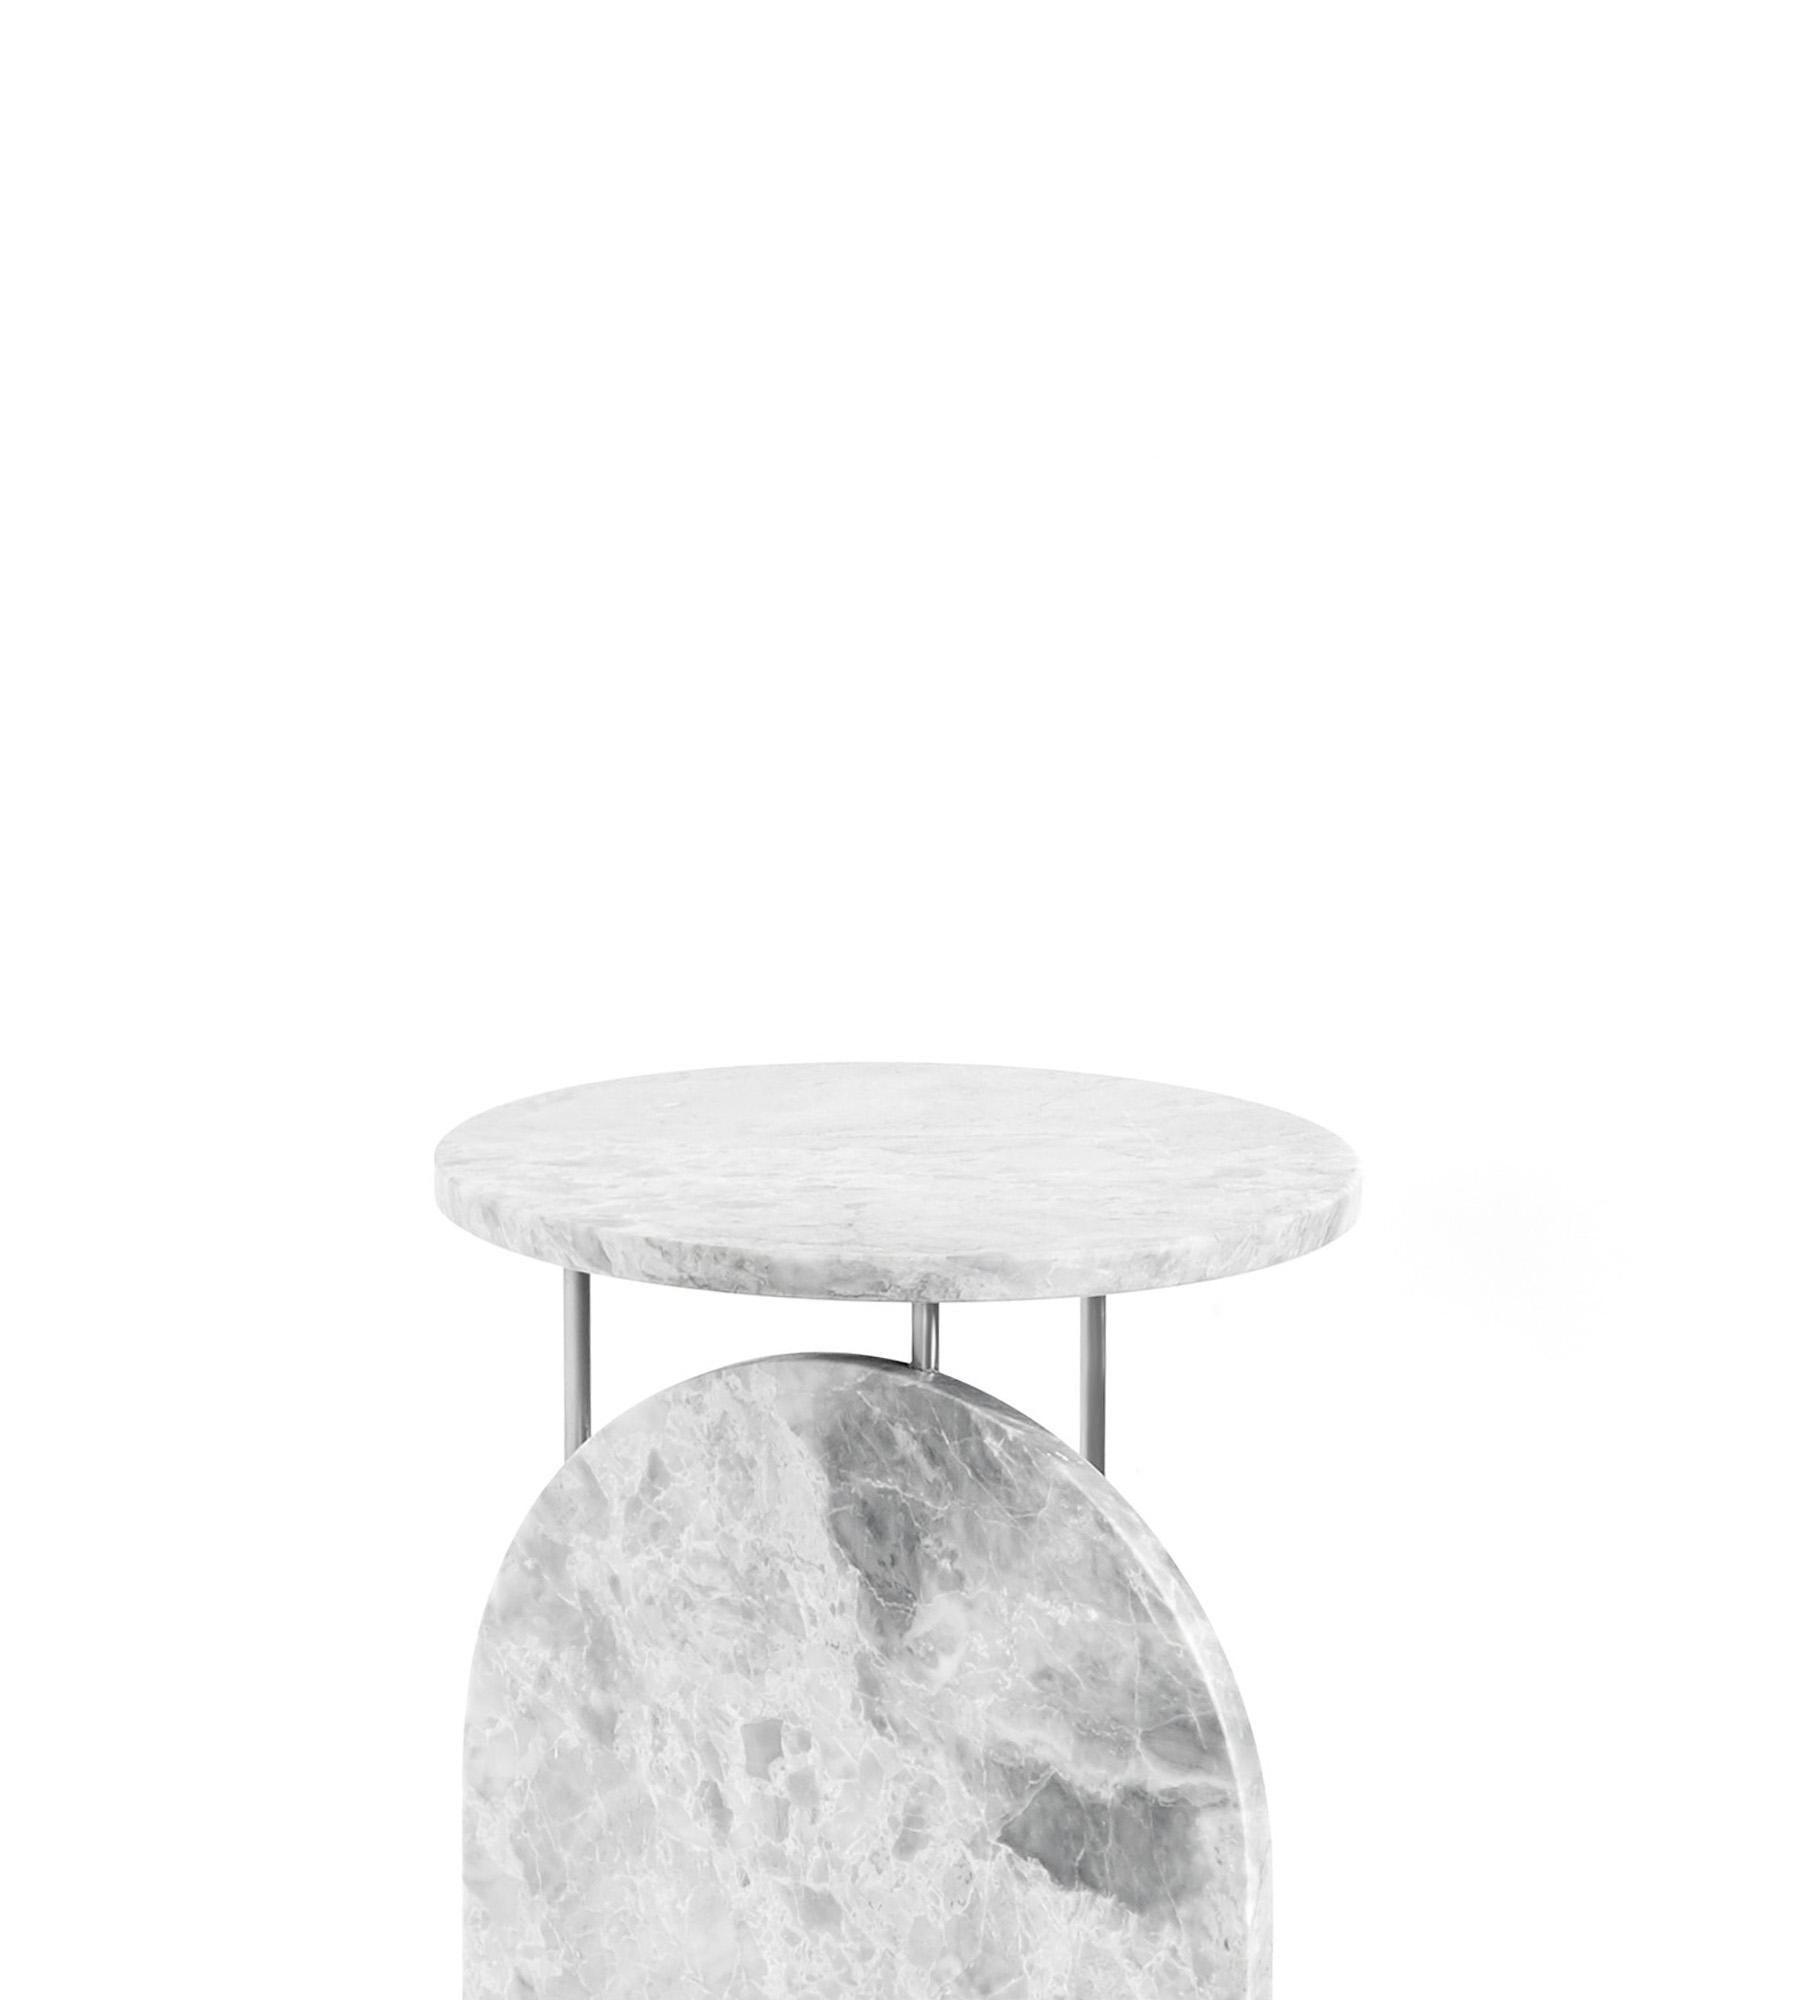 Recycling is about dimensions, not only material.
This small table, 1 of 12 series, designed by Enrico Girotti, which uses and enhances single portions of stone and slabs, advanced by processes that require larger dimensions than furnishing